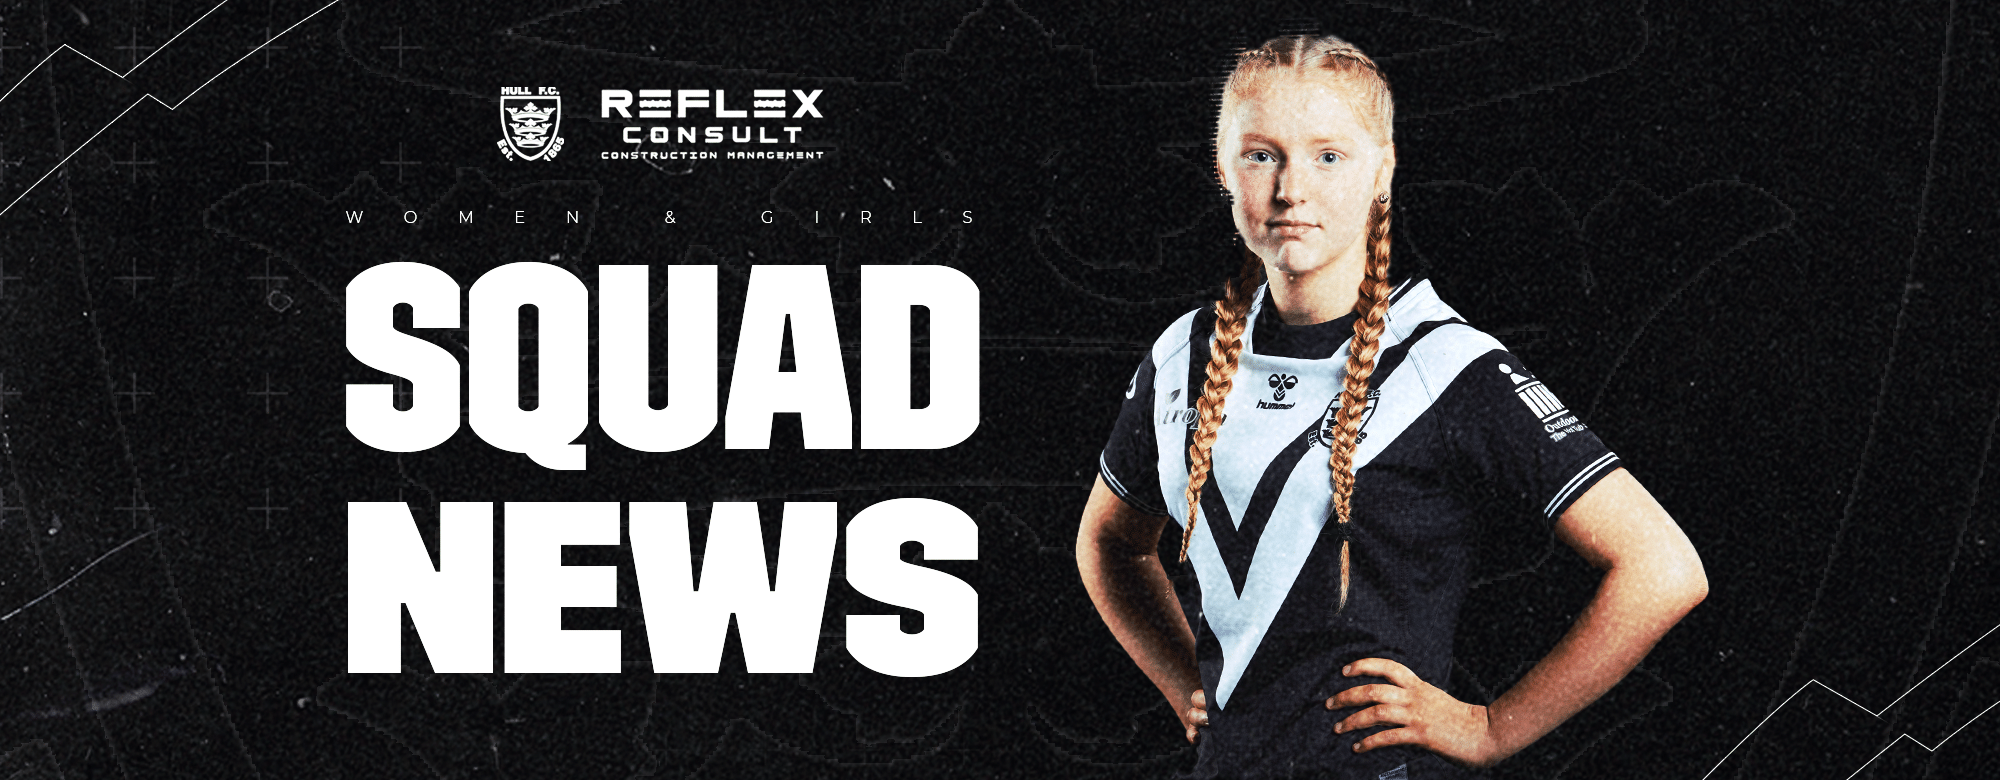 Girls & Women’s Squad News For Weekend Games